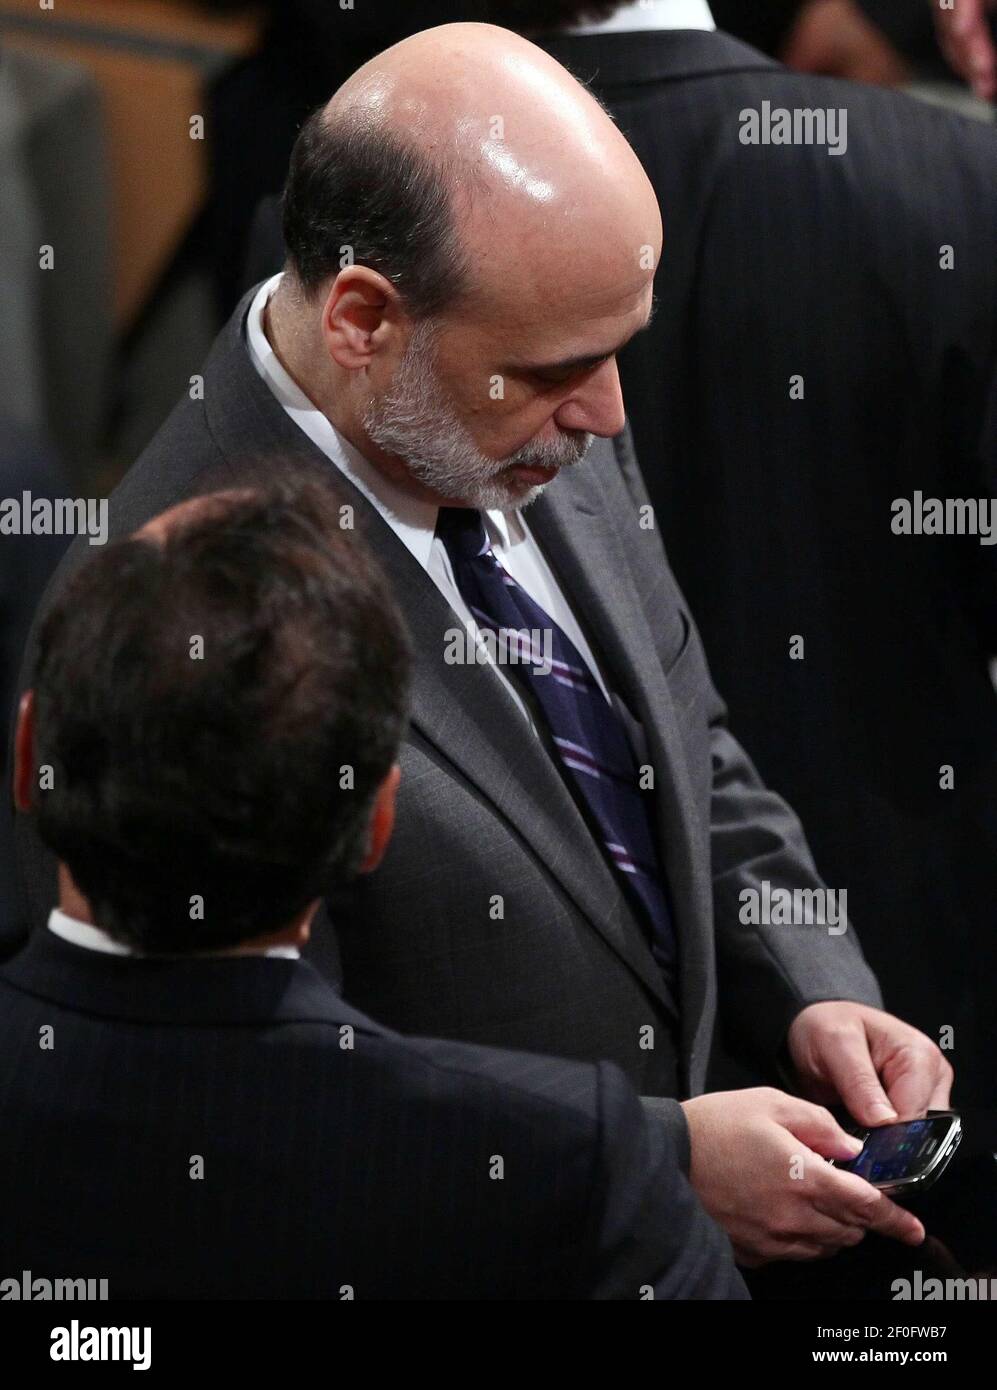 21 July 2010 - Washington, D.C. - Federal Reserve Chairman Ben Bernanke checks his phone before U.S. President Barack Obama signed the Dodd-Frank Wall Street Reform and Consumer Protection Act at the Ronald Reagan Building July 21, 2010 in Washington, DC. The bill is the strongest financial reform legislation since the Great Depression and also creates a consumer protection bureau that oversees banks on mortgage lending and credit card practices. Photo Credit: Win McNamee/Pool/Sipa Press/1007211950 Stock Photo